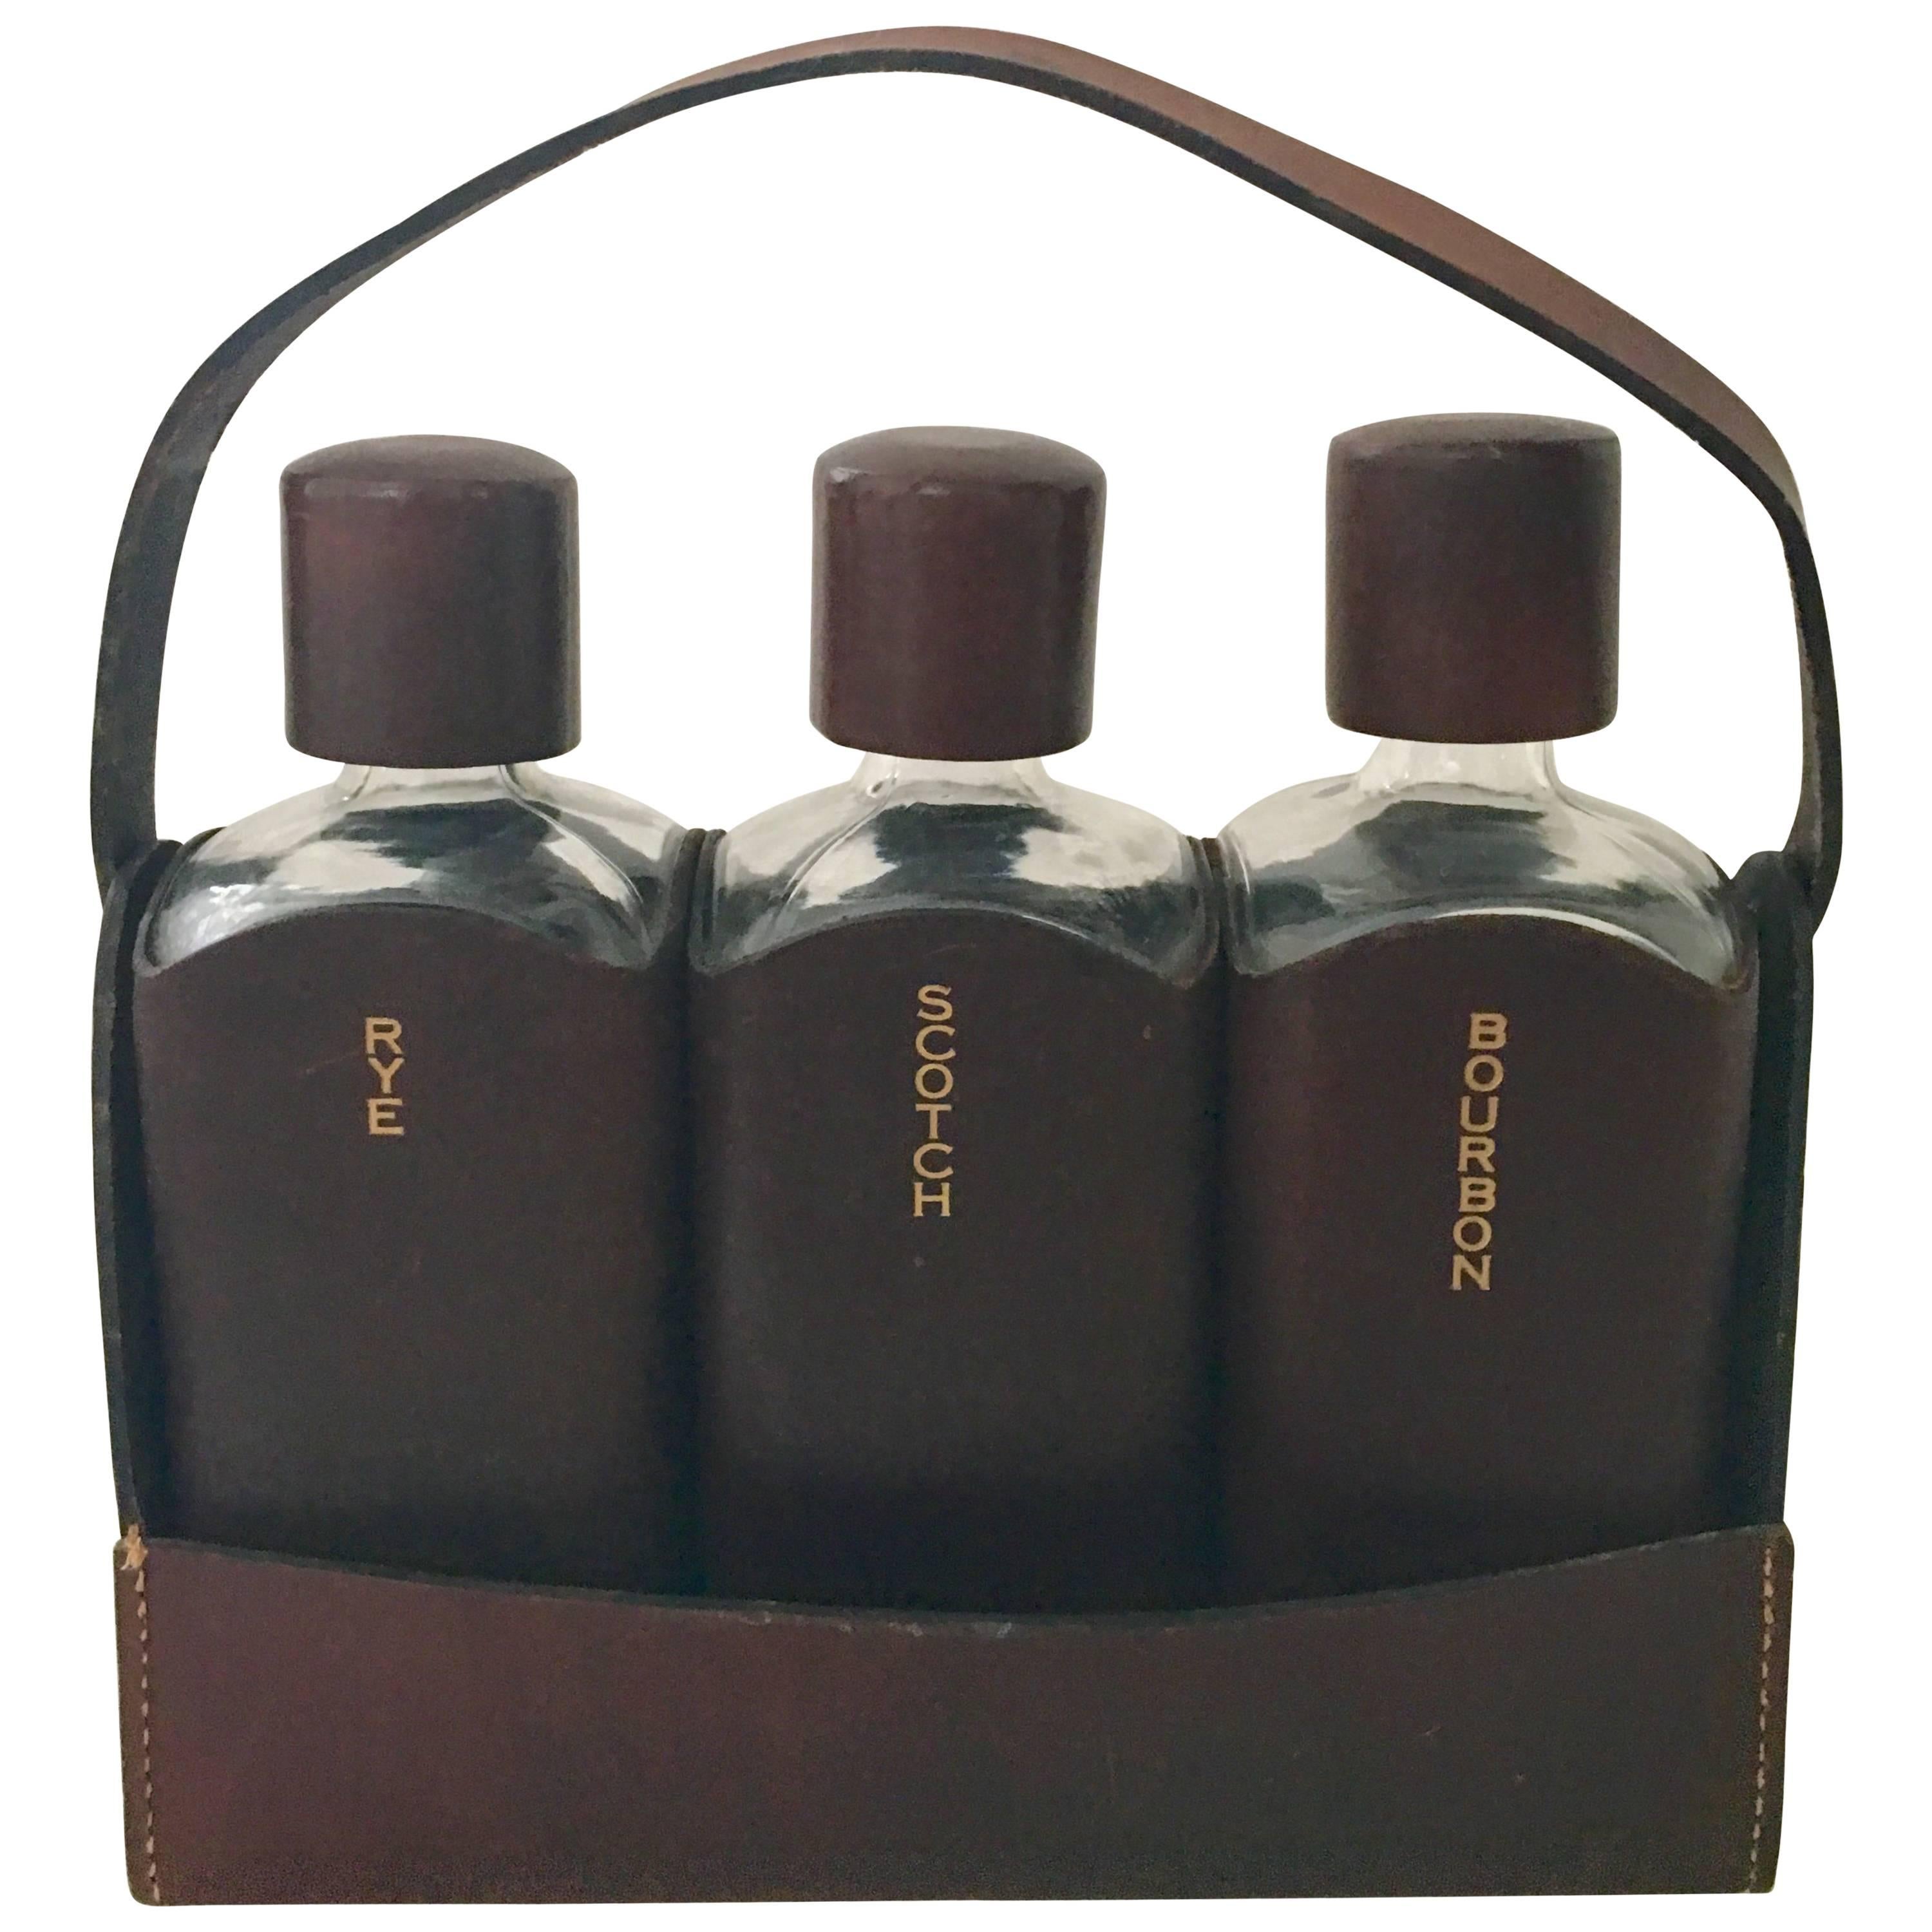 20th Century English Leather Wrapped Glass Liquor Bottles & Caddie By Albro, 